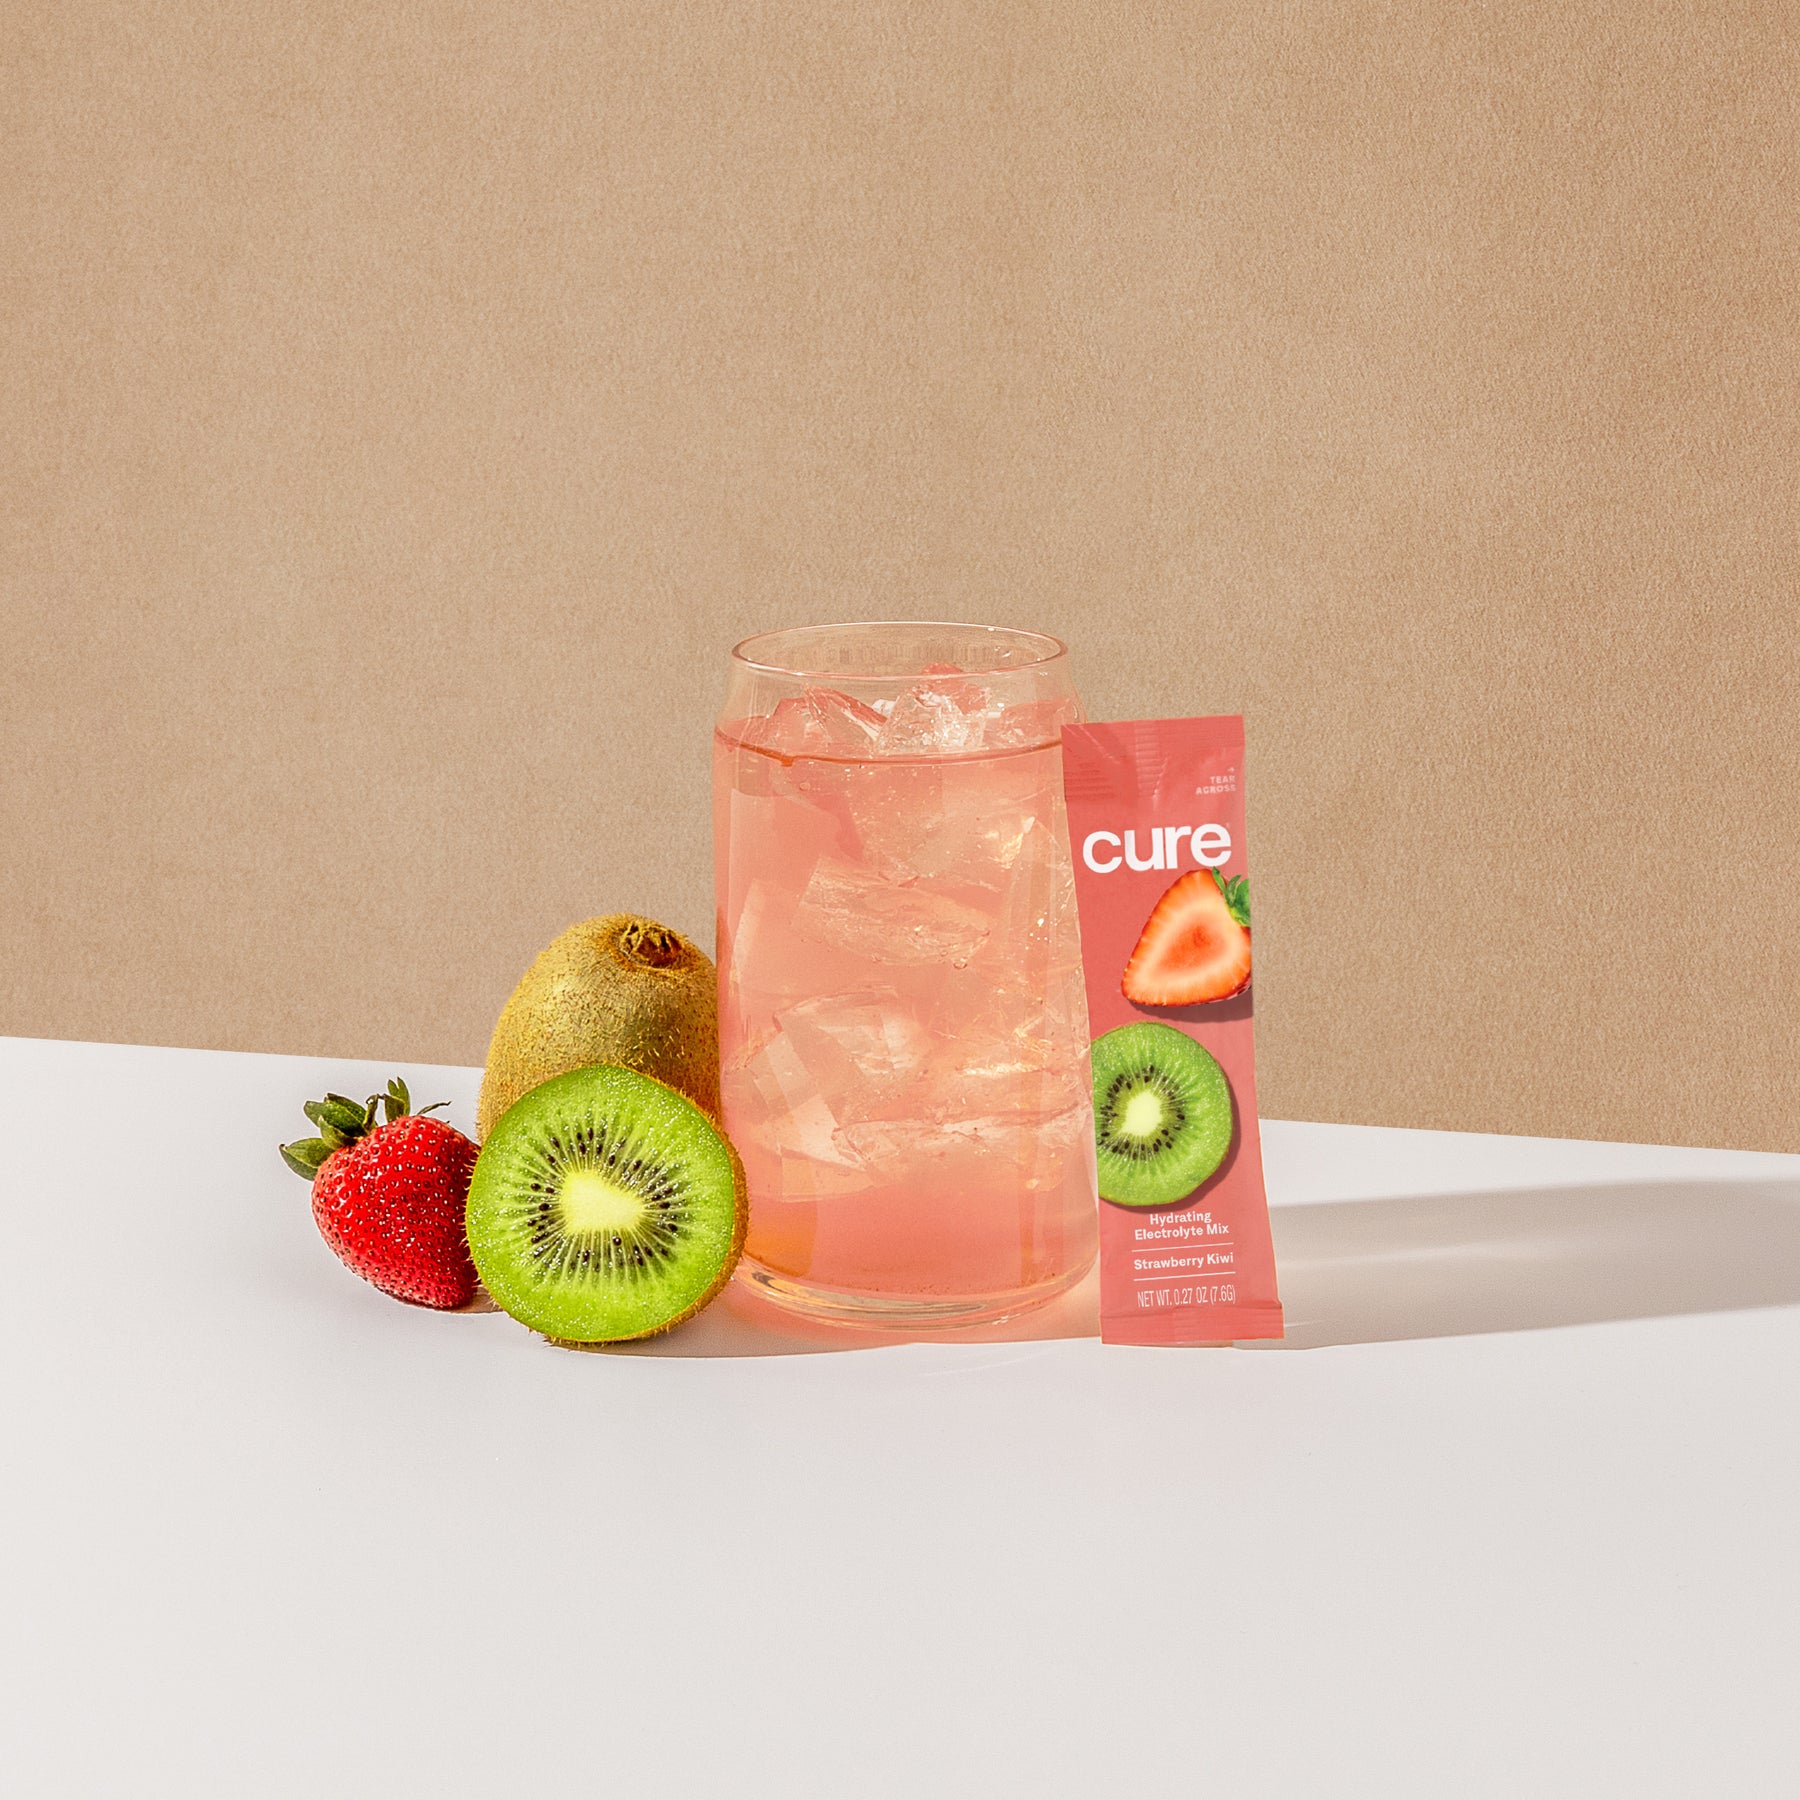 Pink drink with a strawberry kiwi mix packet and fresh fruits.